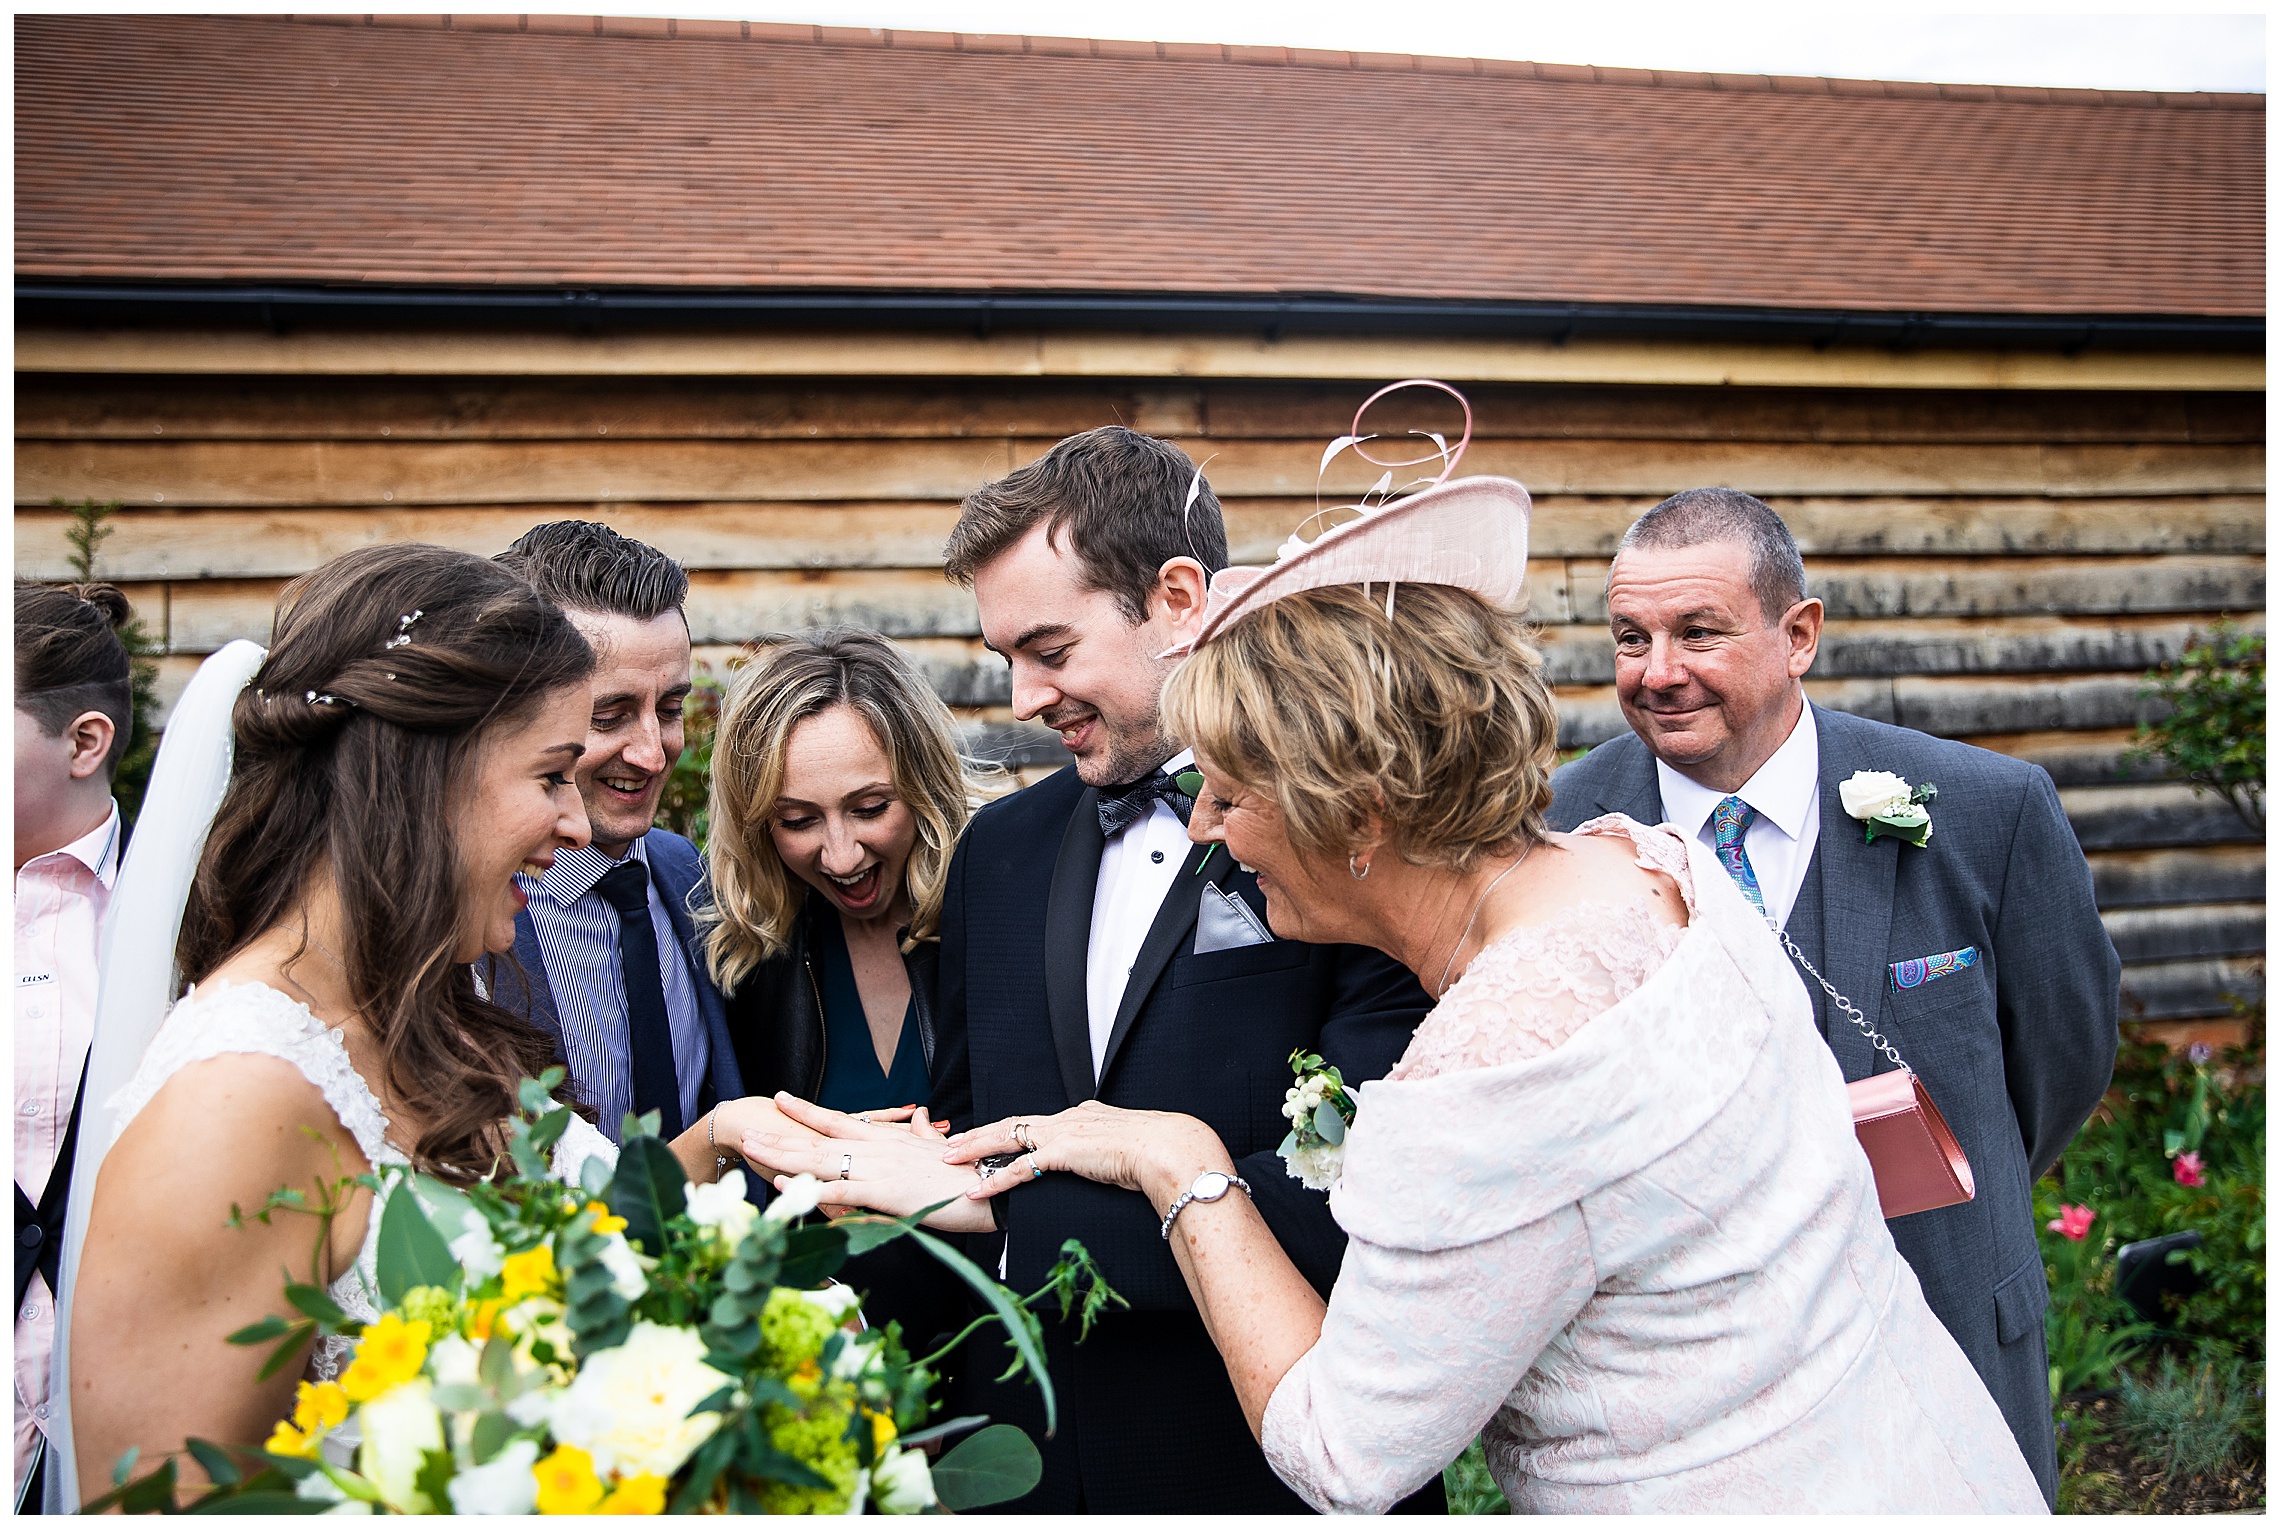 guests crowding round groom to look at wedding ring